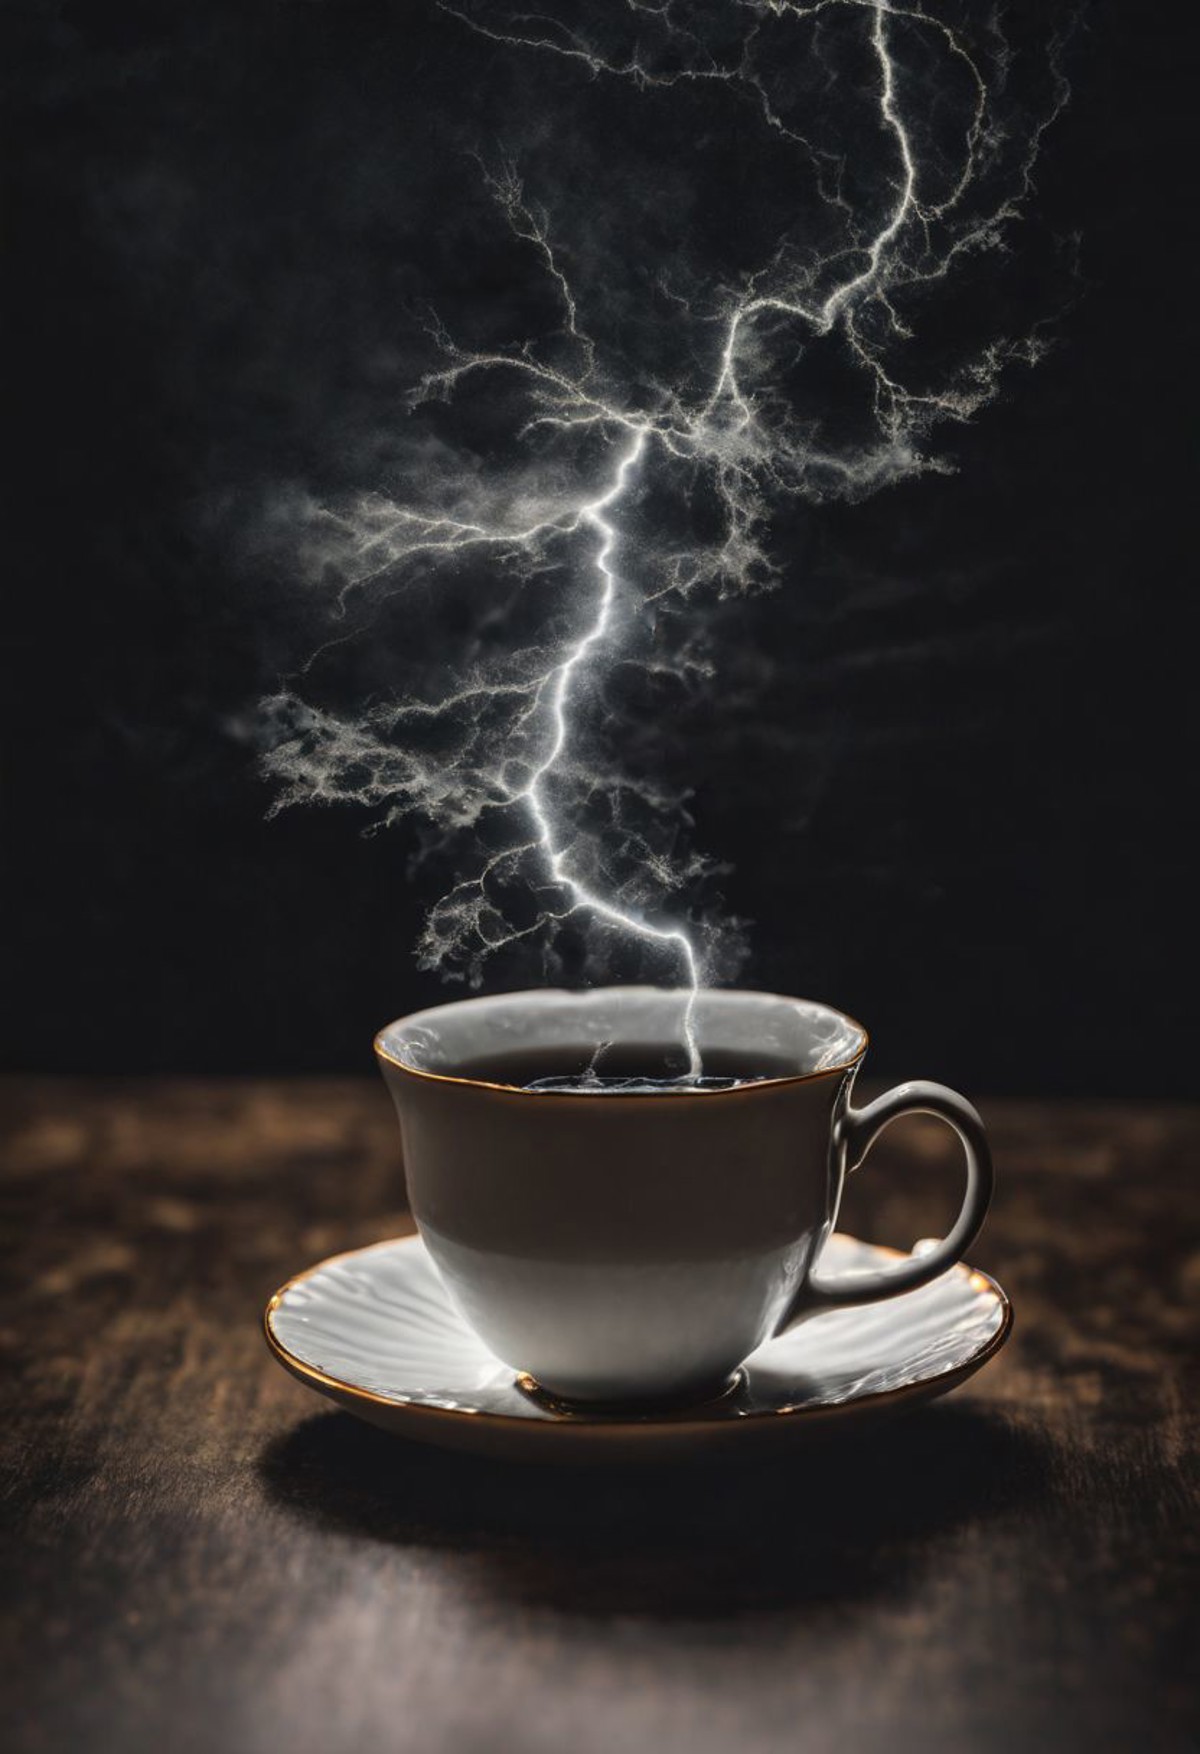 photo of storm in a teacup, black background